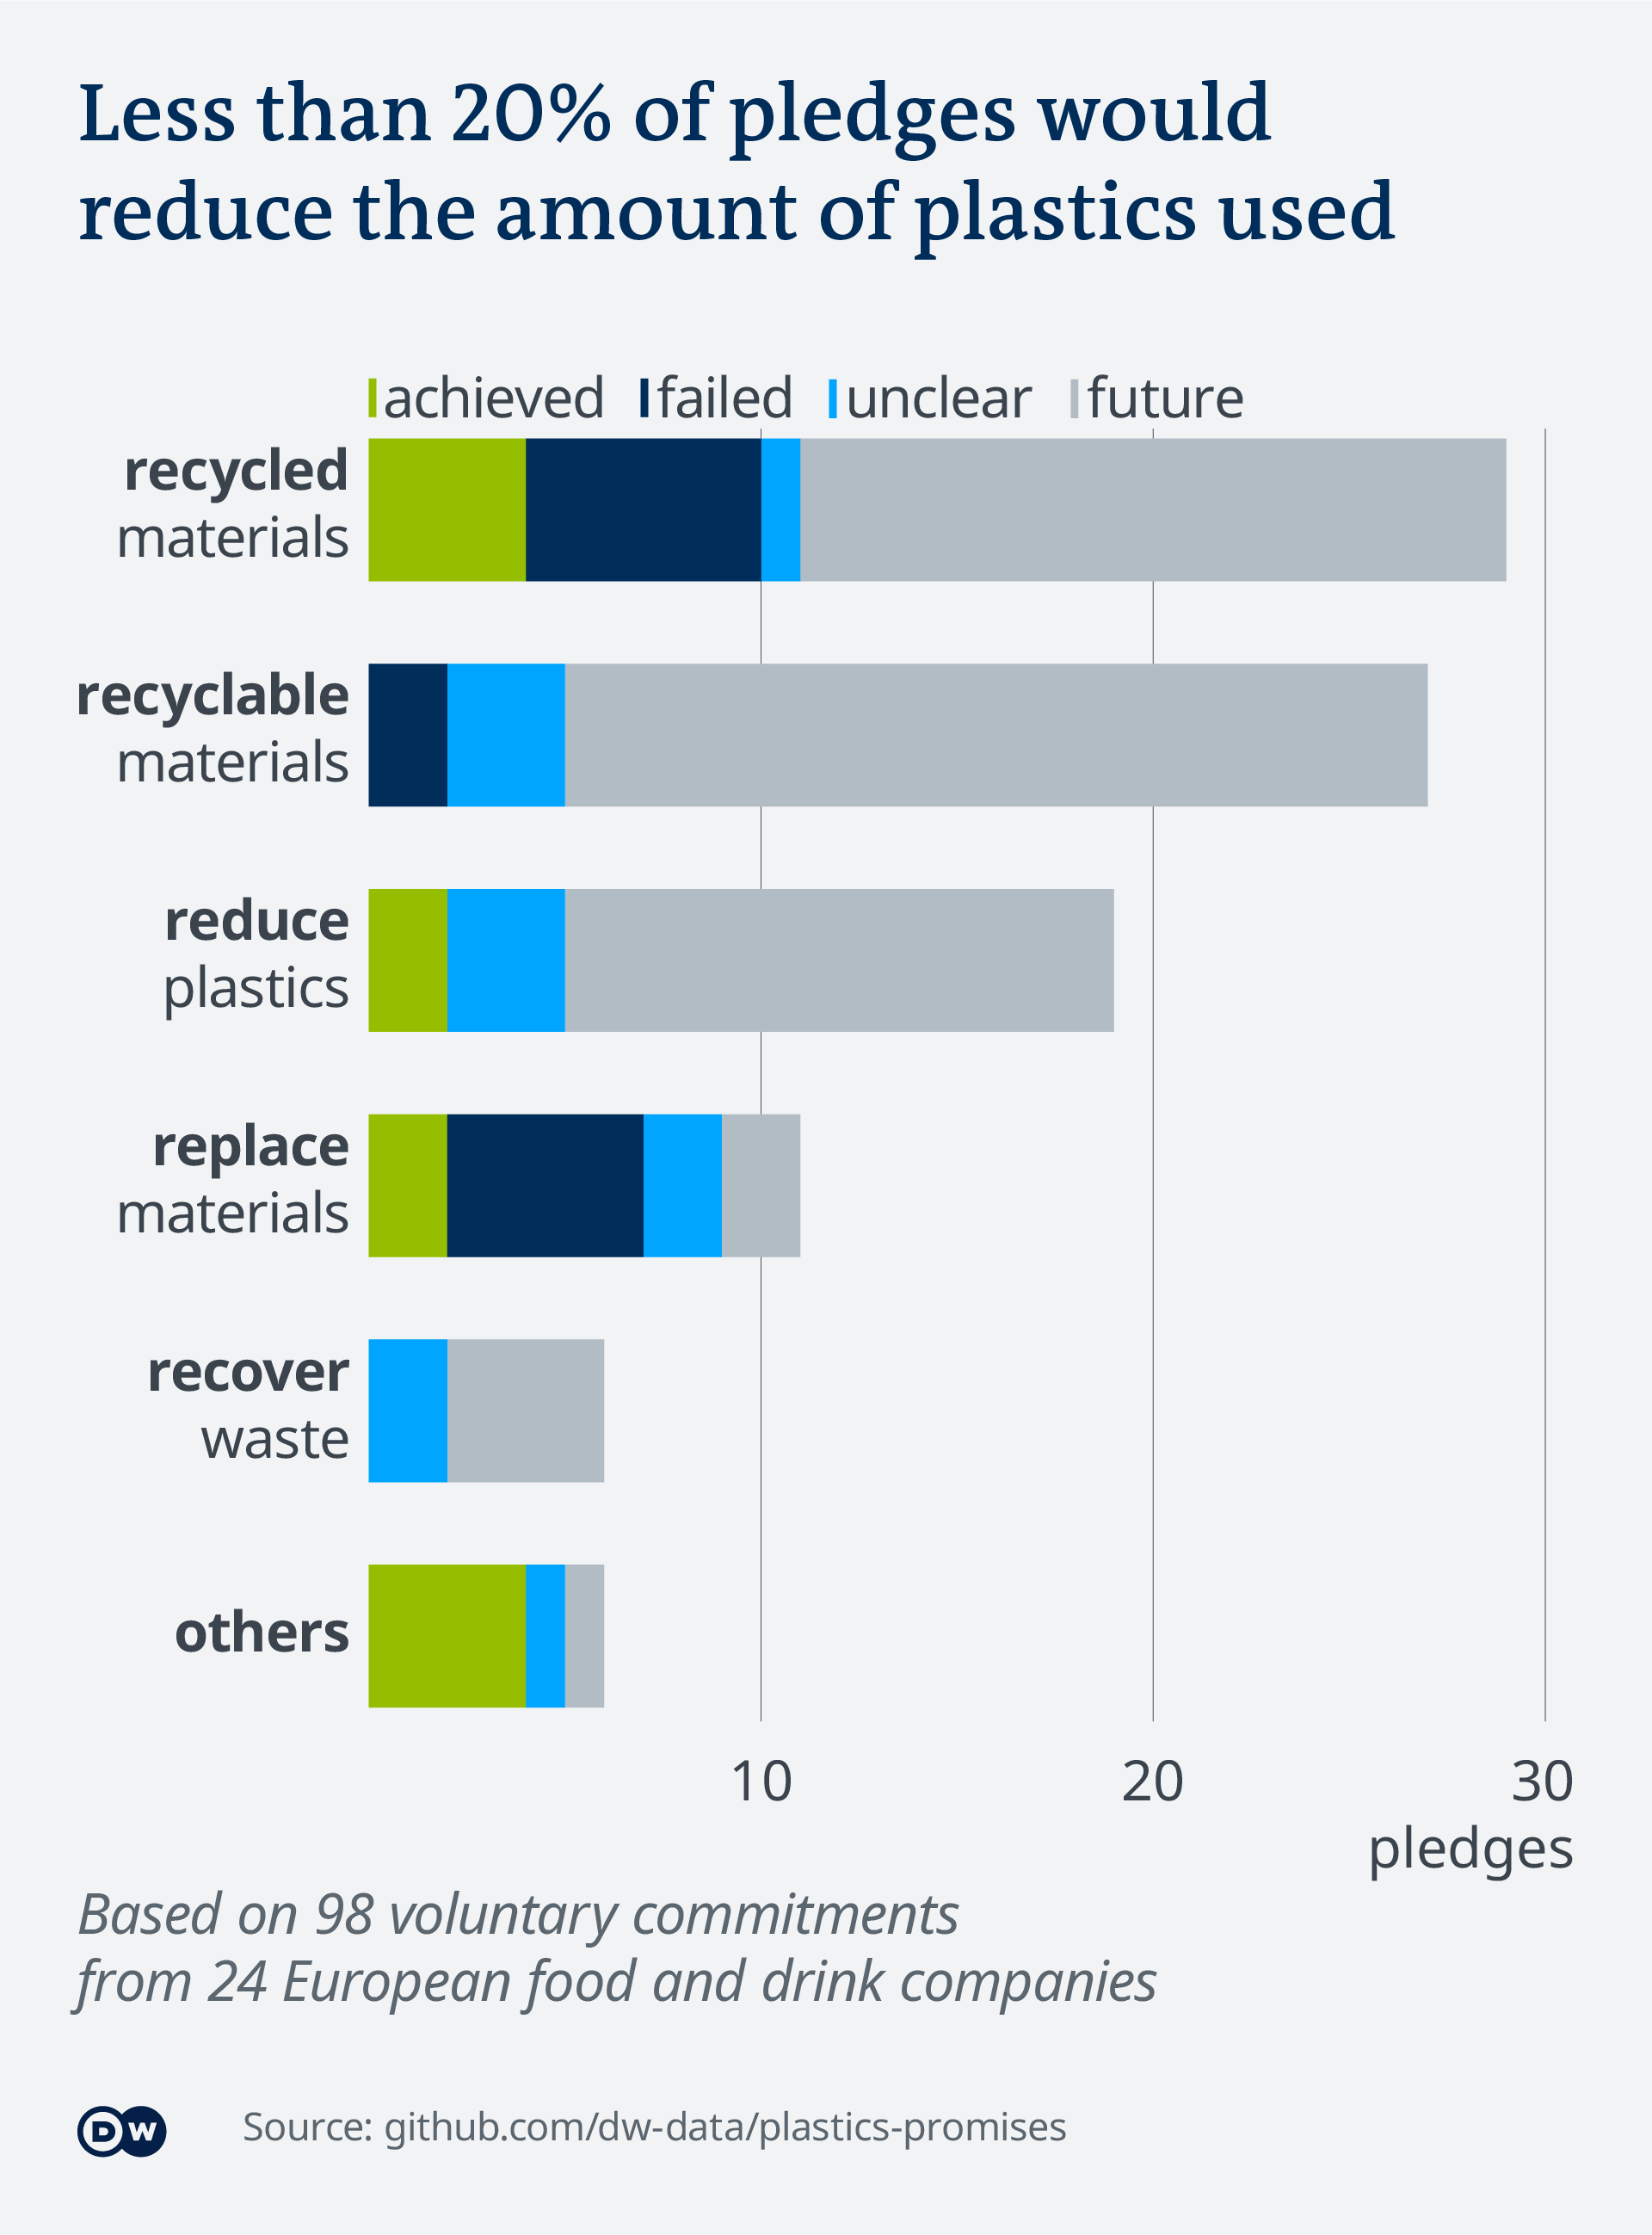 An infographic showing the proportion of plastics pledges by type: recyclable, recycled, reduced, etc.